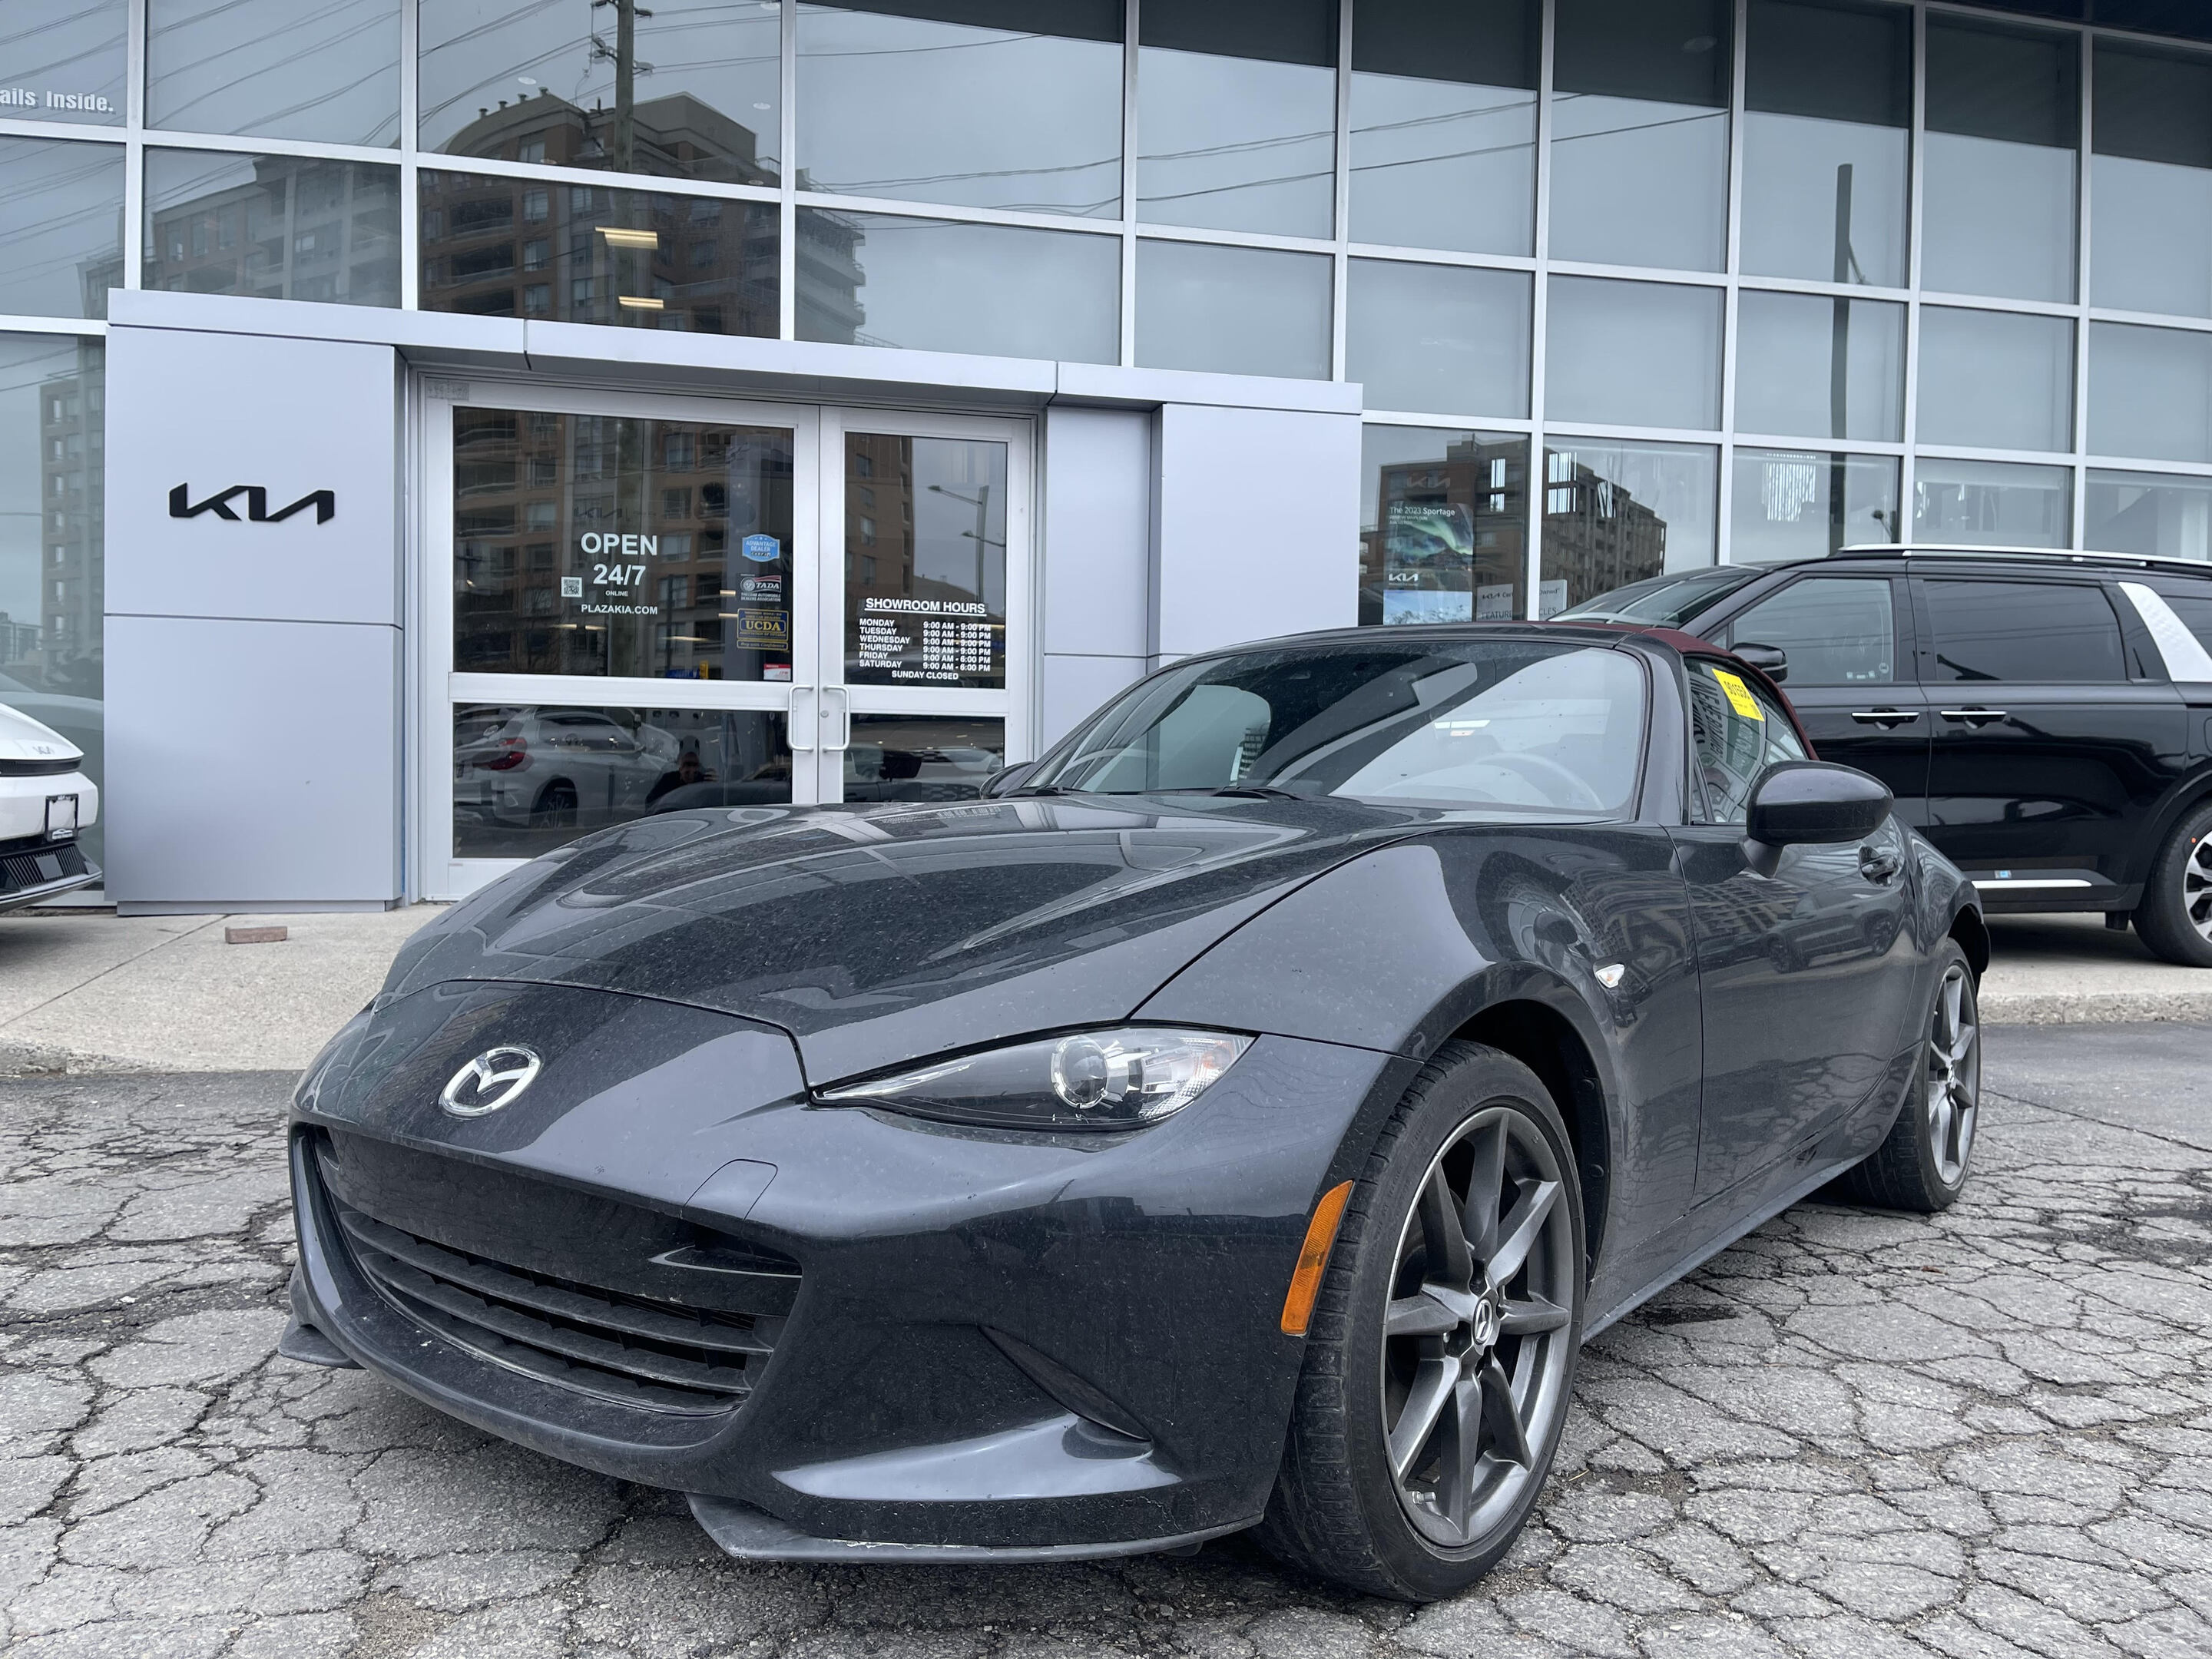 2019 Mazda MX-5 Enjoy Summer in This Great *CONVERTIBLE*